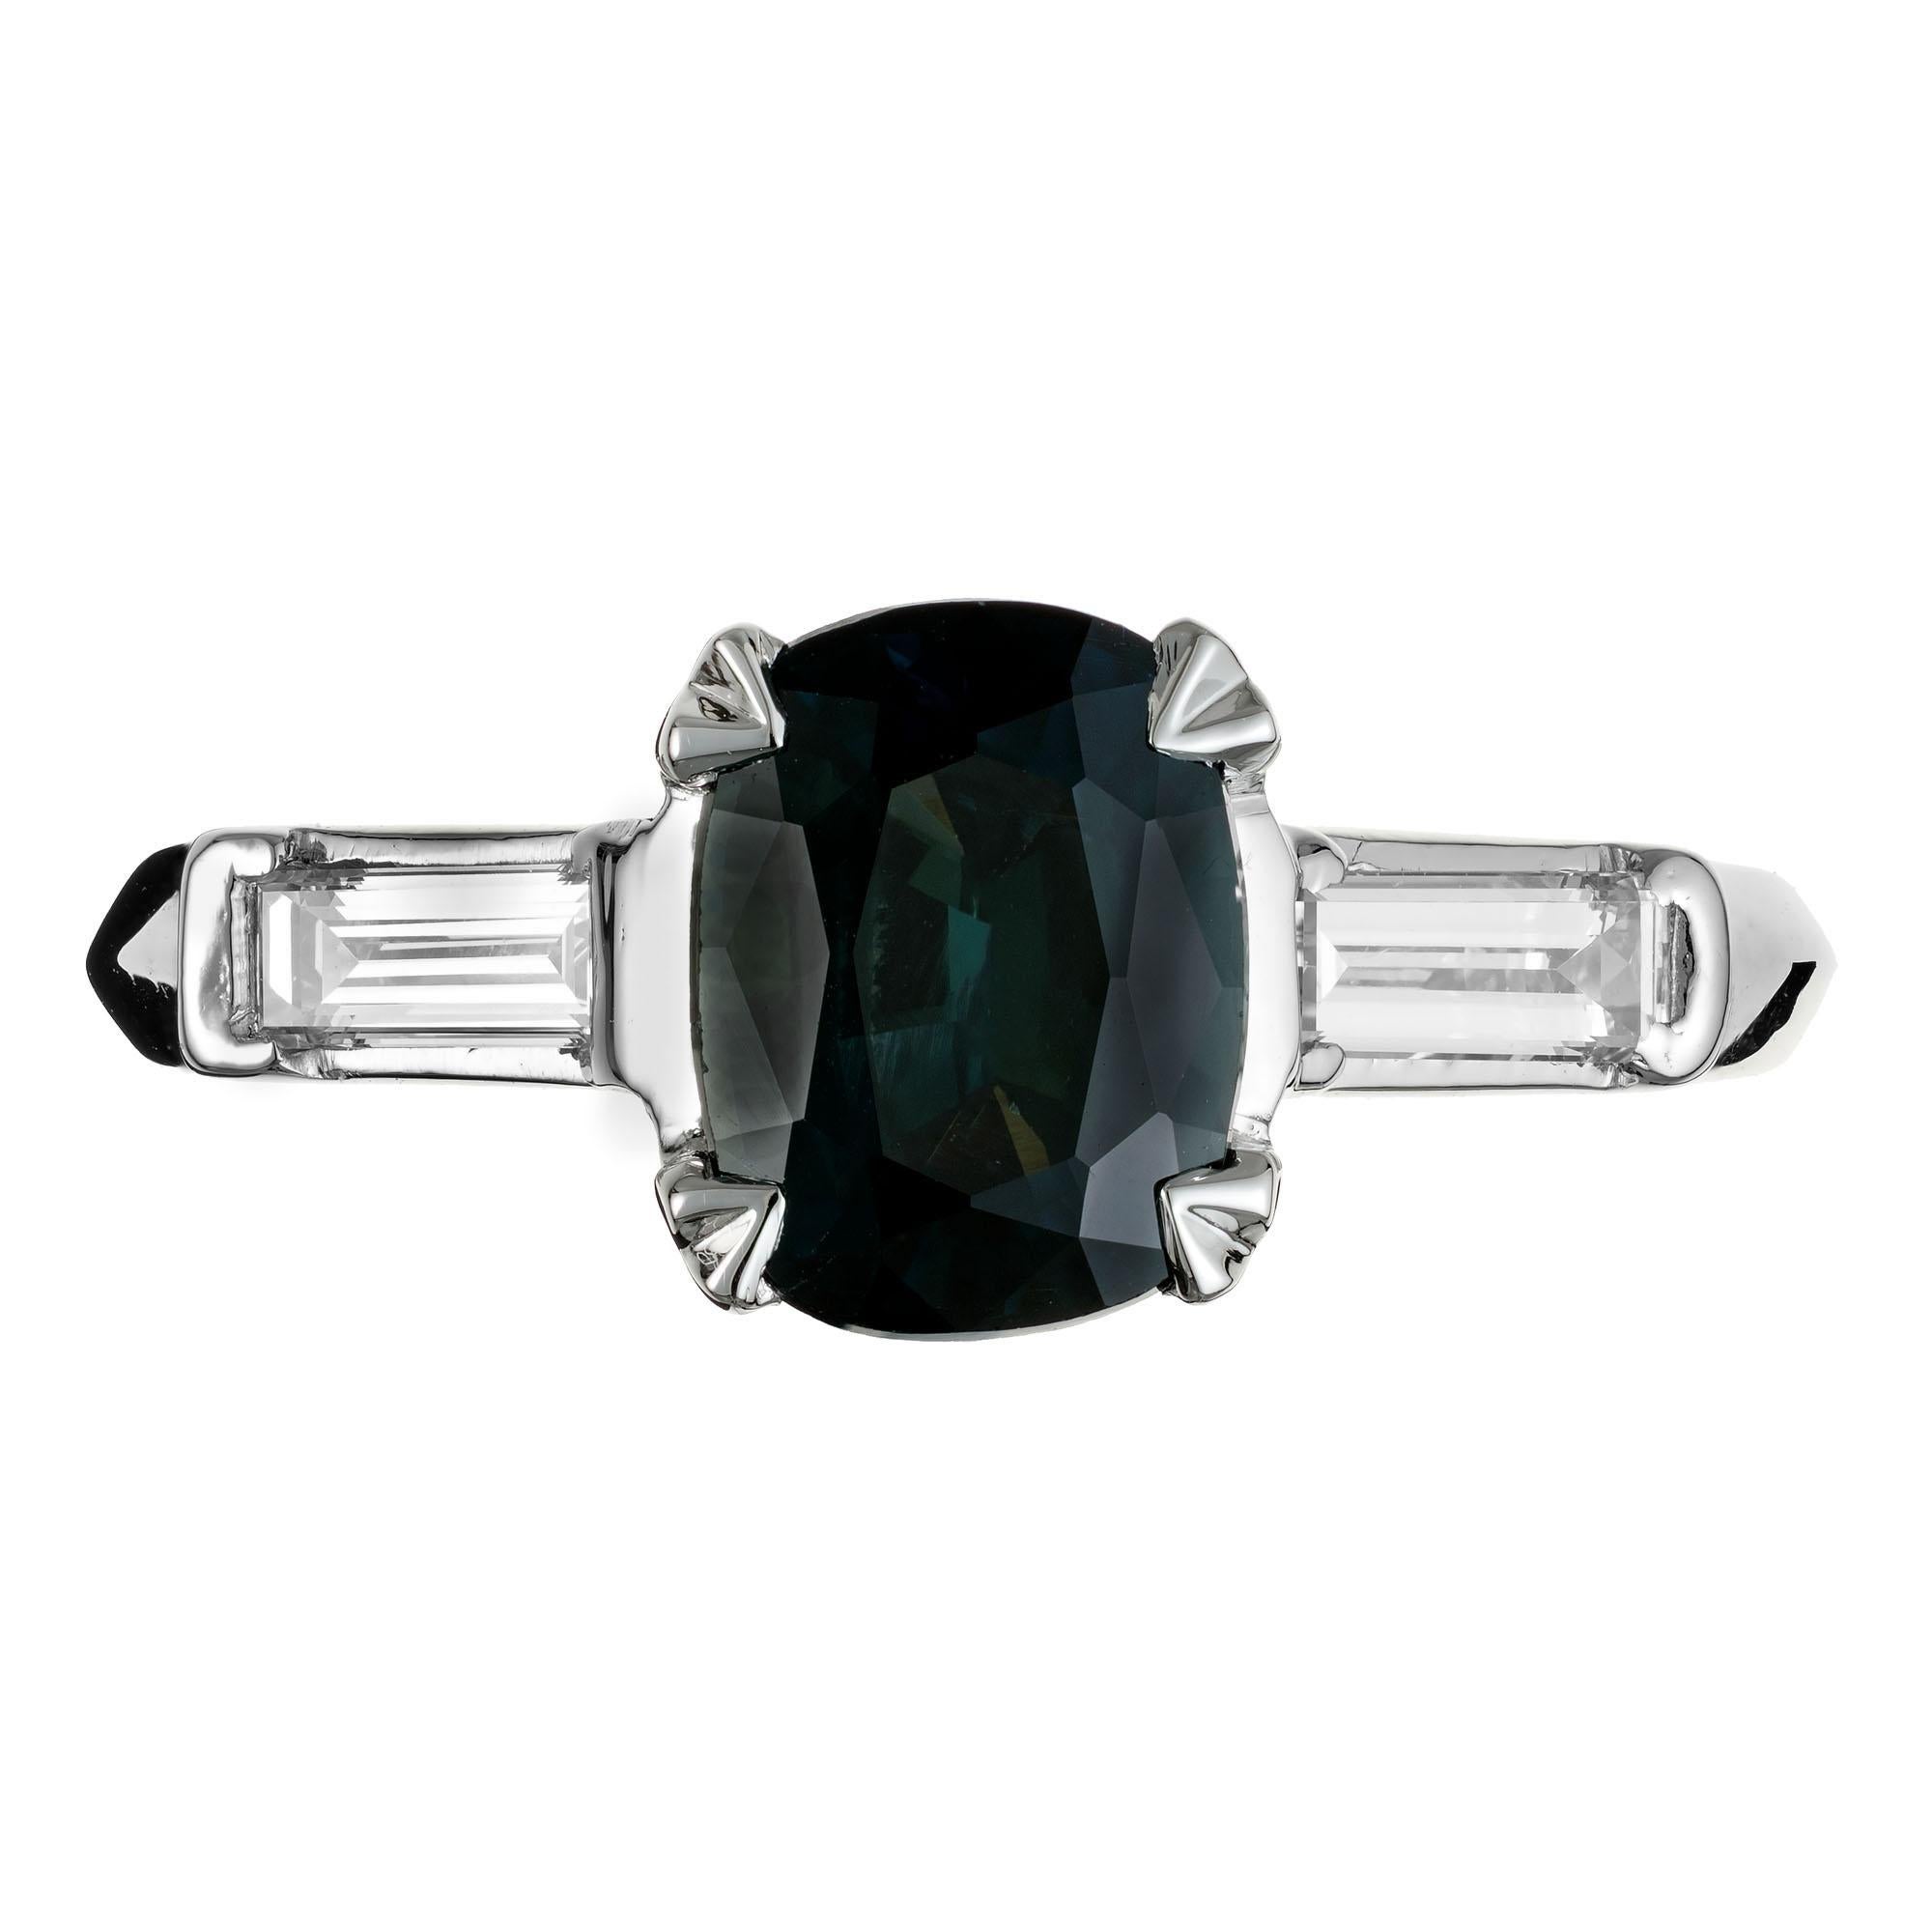 Natural green sapphire and diamond engagement ring. GIA Certified natural untreated oval cushion cut sapphire in a platinum three-stone setting with two baguette cut side diamonds.  from an estate circa 1920. The setting is designed and crafted in